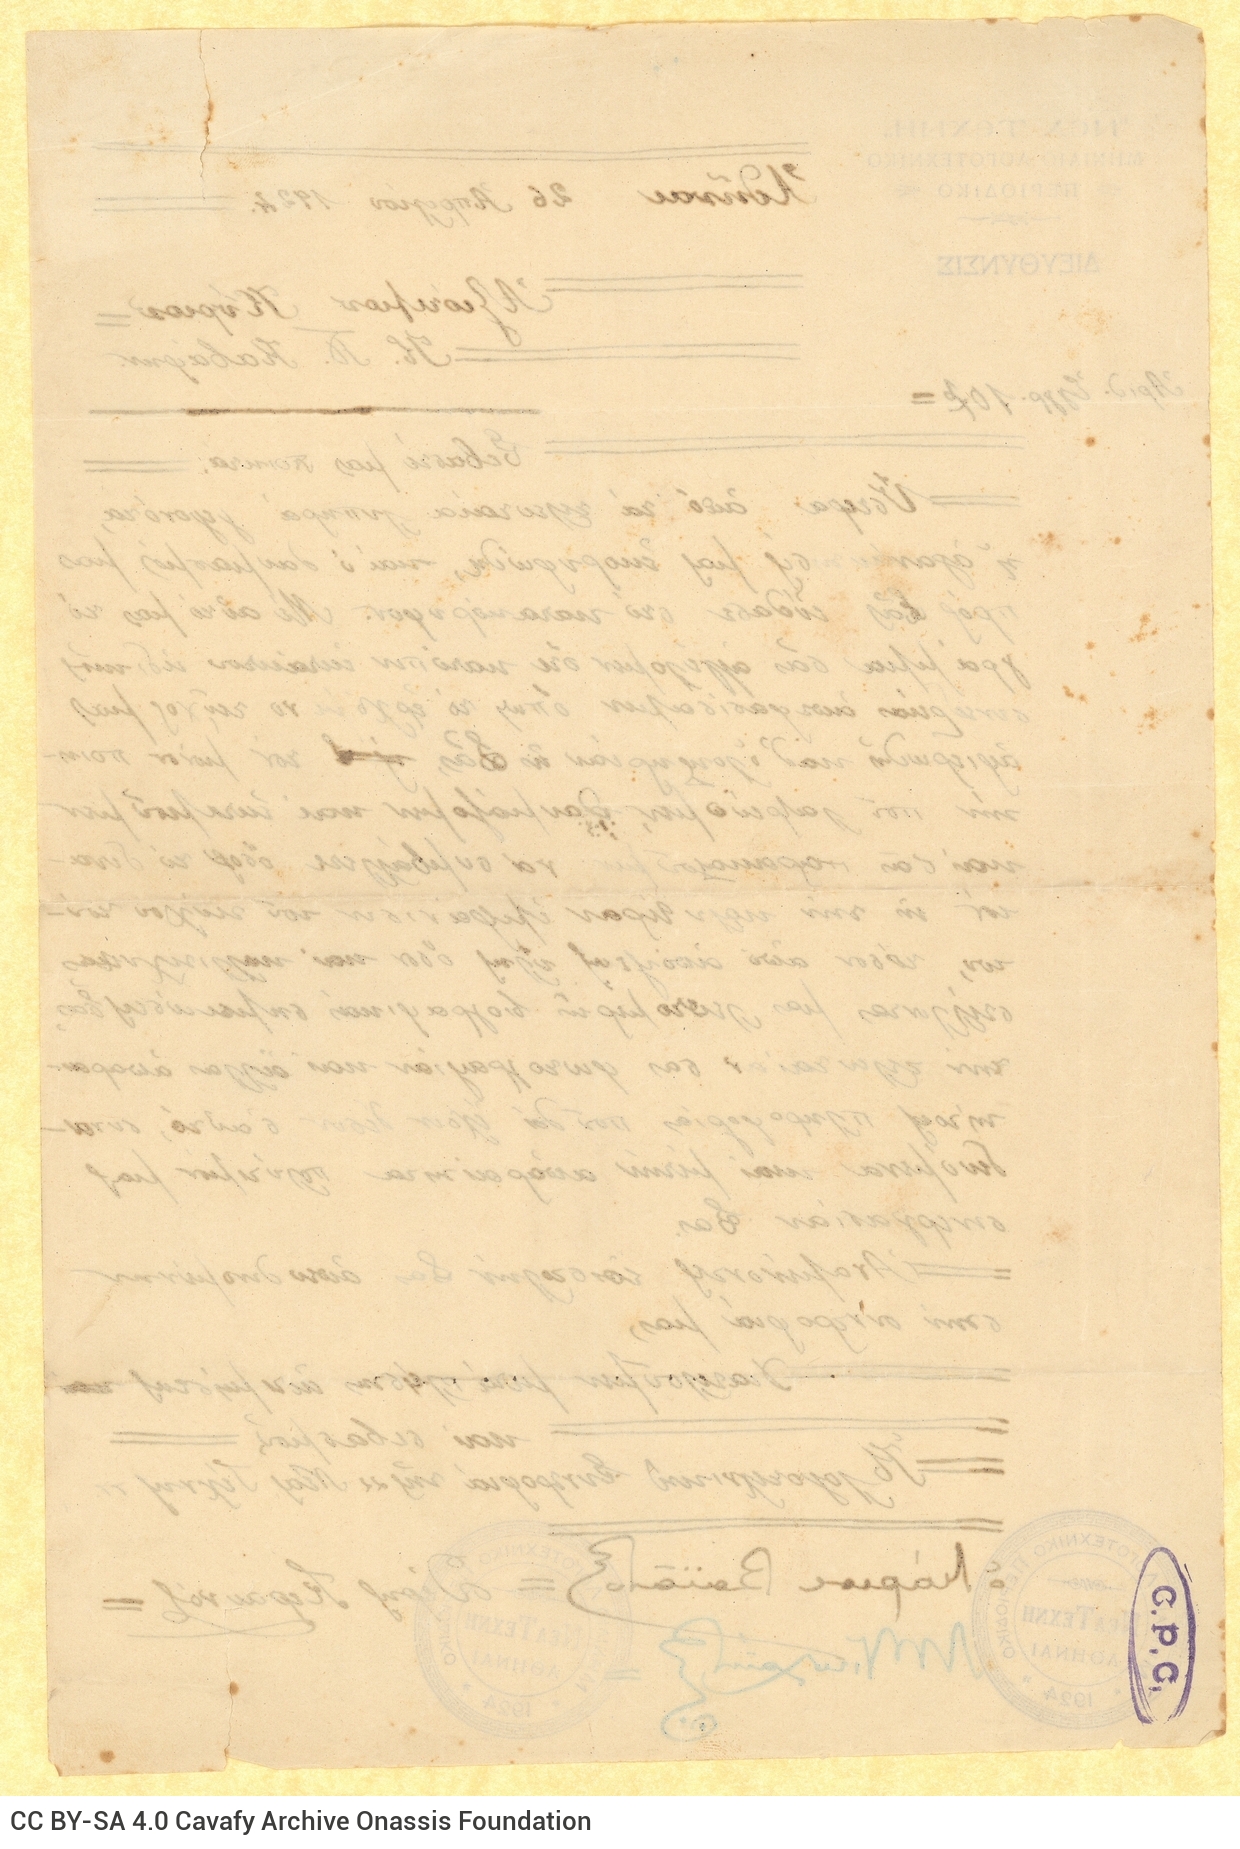 Handwritten letter by M. Vaianos, Th. Keravnos and M. Nikolaidis on behalf of the journal *Nea Techni*, on the recto of a she